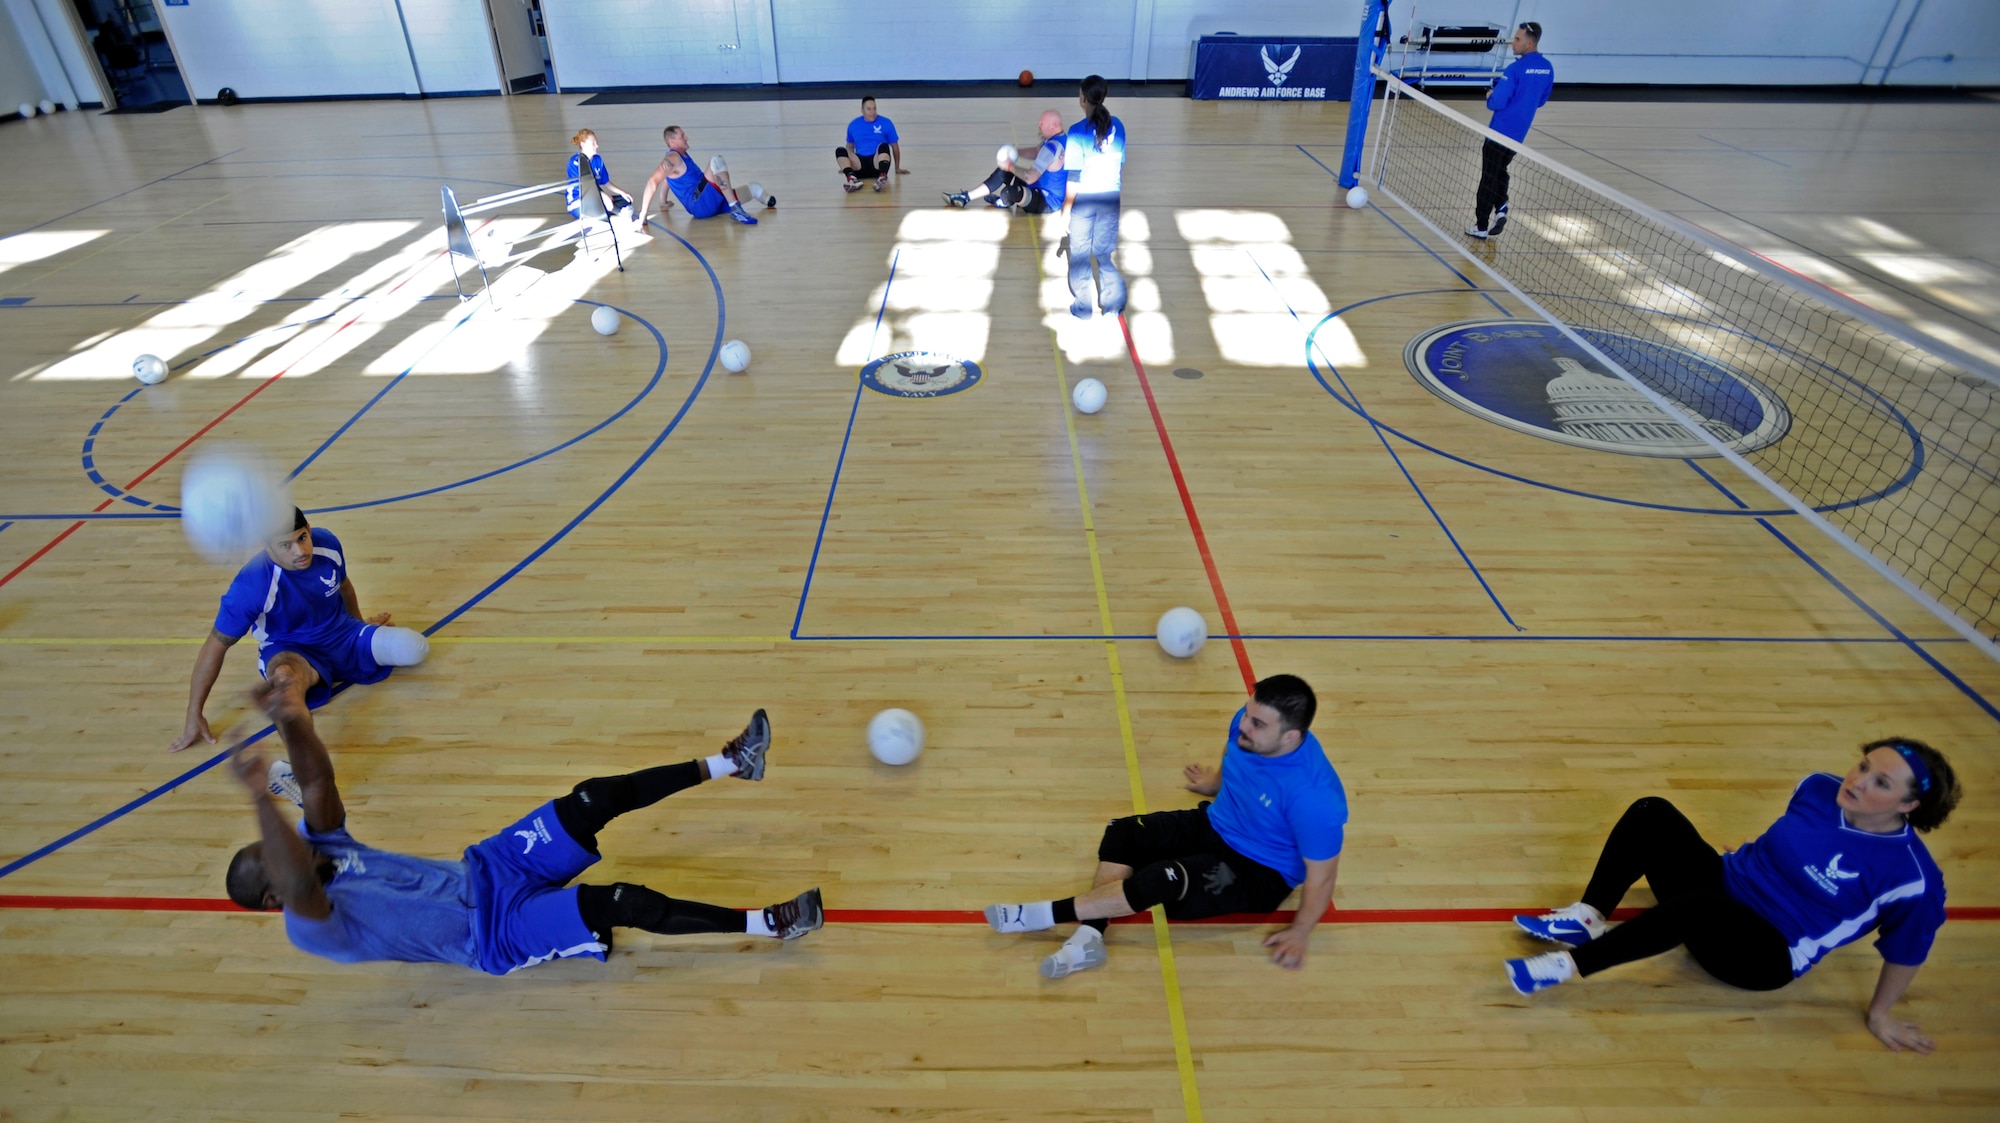 Air Force wounded, ill or injured warriors practice Nov. 18, 2014, at Joint Base Andrews, Md., for an upcoming Pentagon Sitting Volleyball Tournament. The one-day tournament is designed to bring awareness to the challenges of the wounded, ill or injured population. (U.S. Air Force photo/Tech. Sgt. Brian Ferguson)